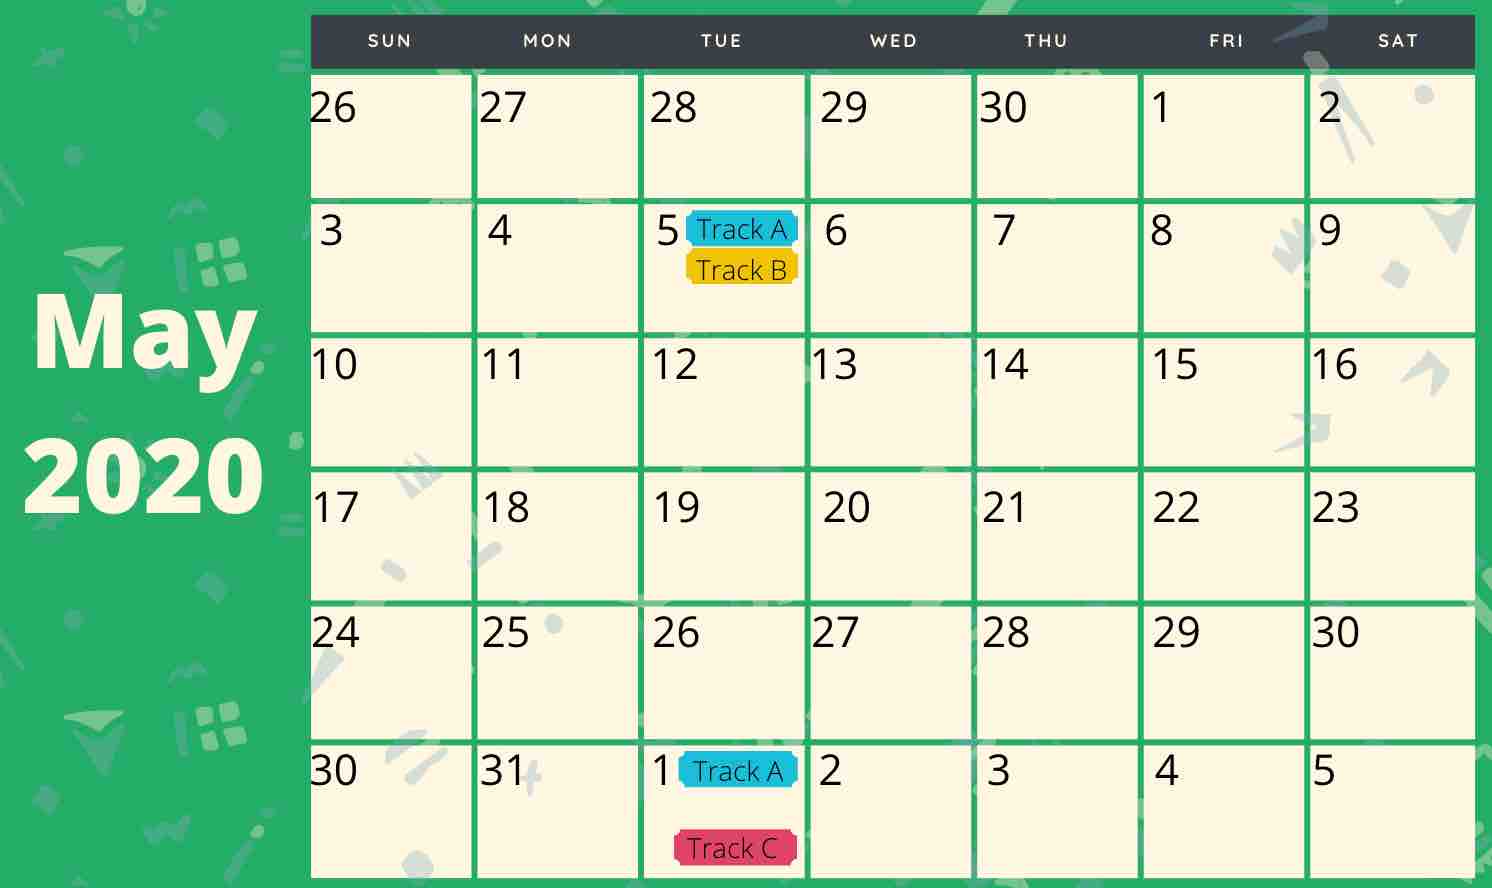 Calendar view of the first month on a monthly sending schedule